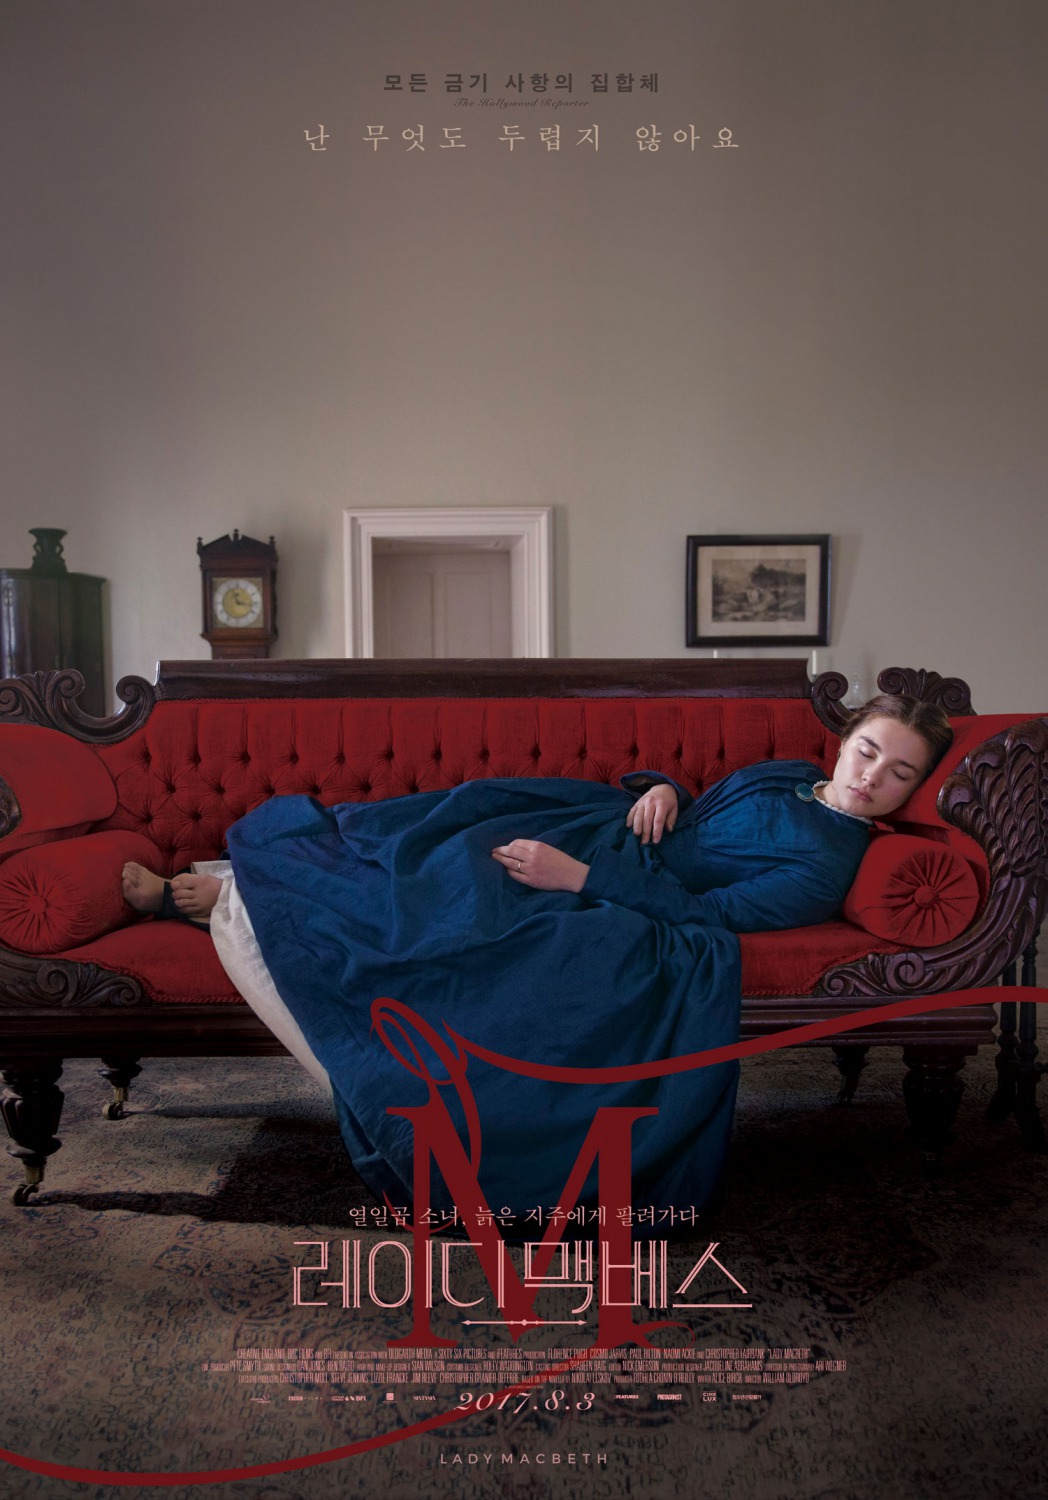 Extra Large Movie Poster Image for Lady Macbeth (#4 of 4)